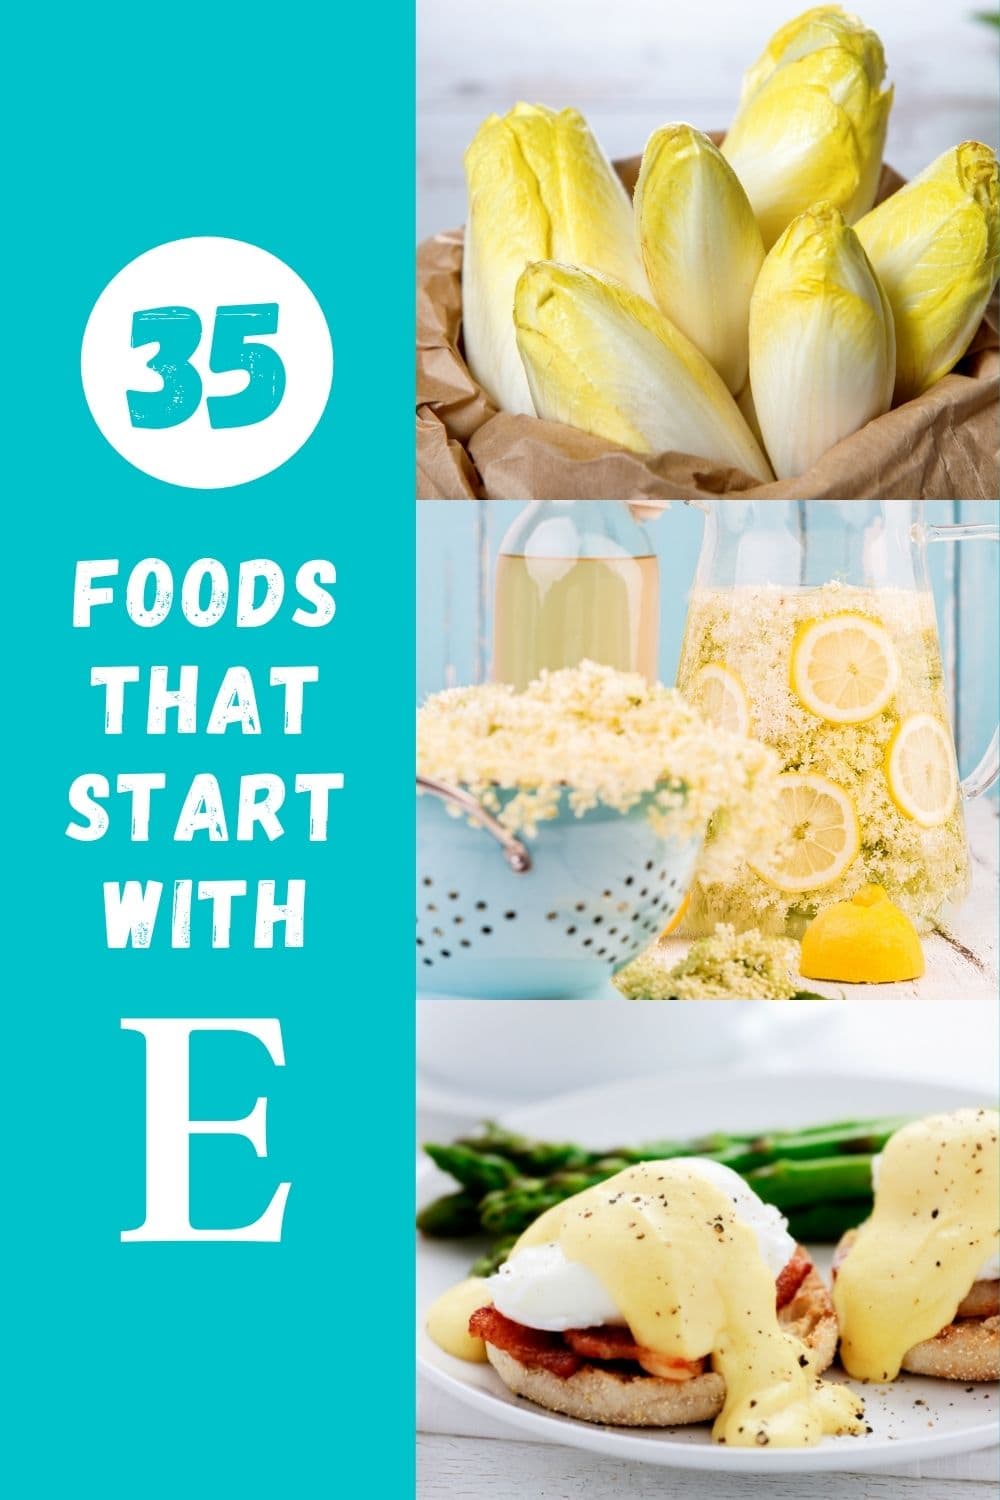 35 Foods that start with E